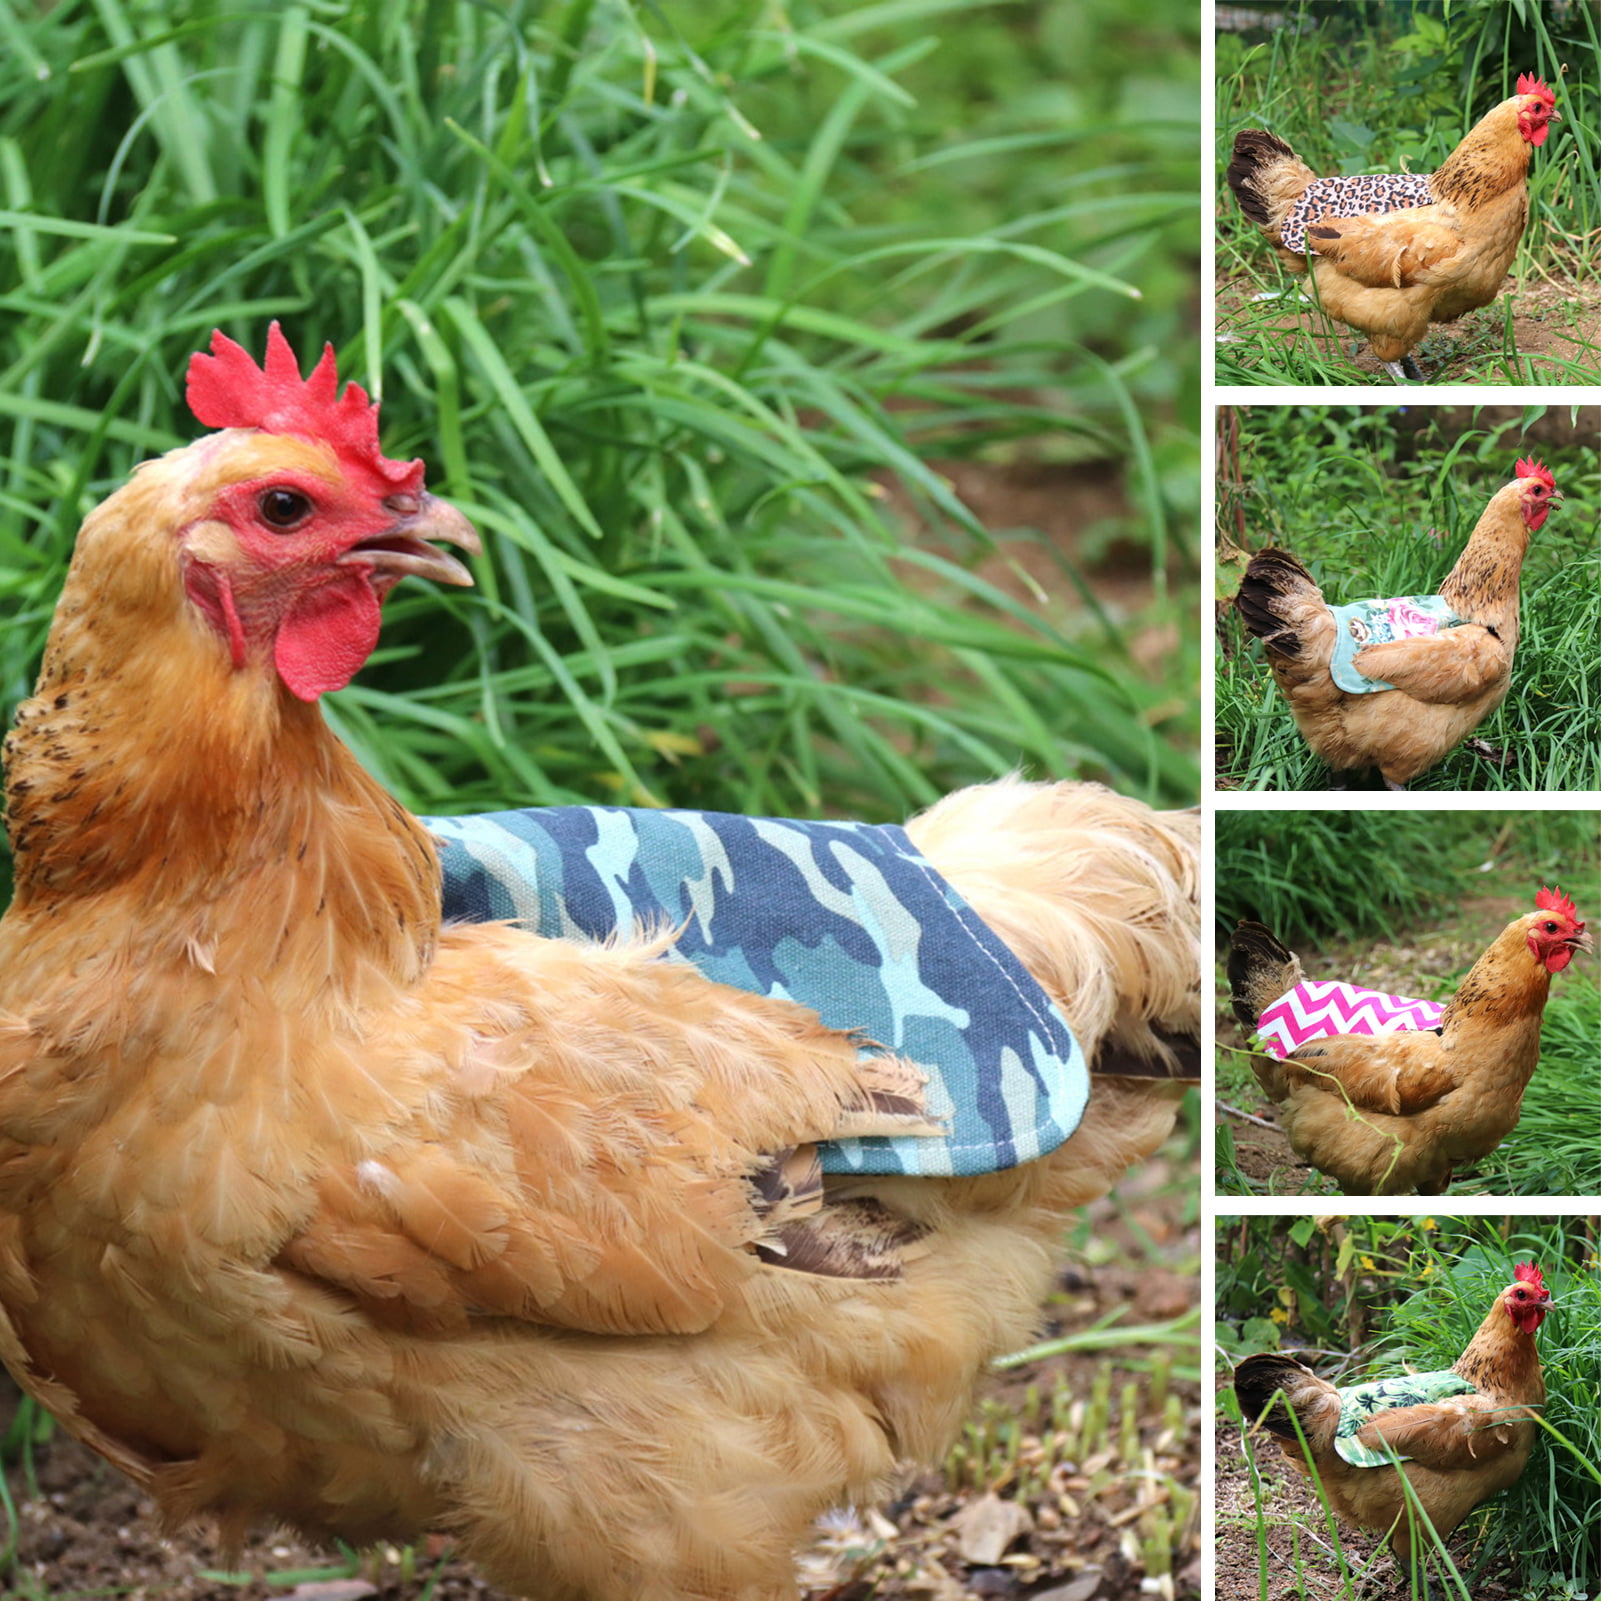 20 Chicken Saddle Apron Hen BACK FEATHER PROTECTION CHICKEN HATCHING EGGS USA 